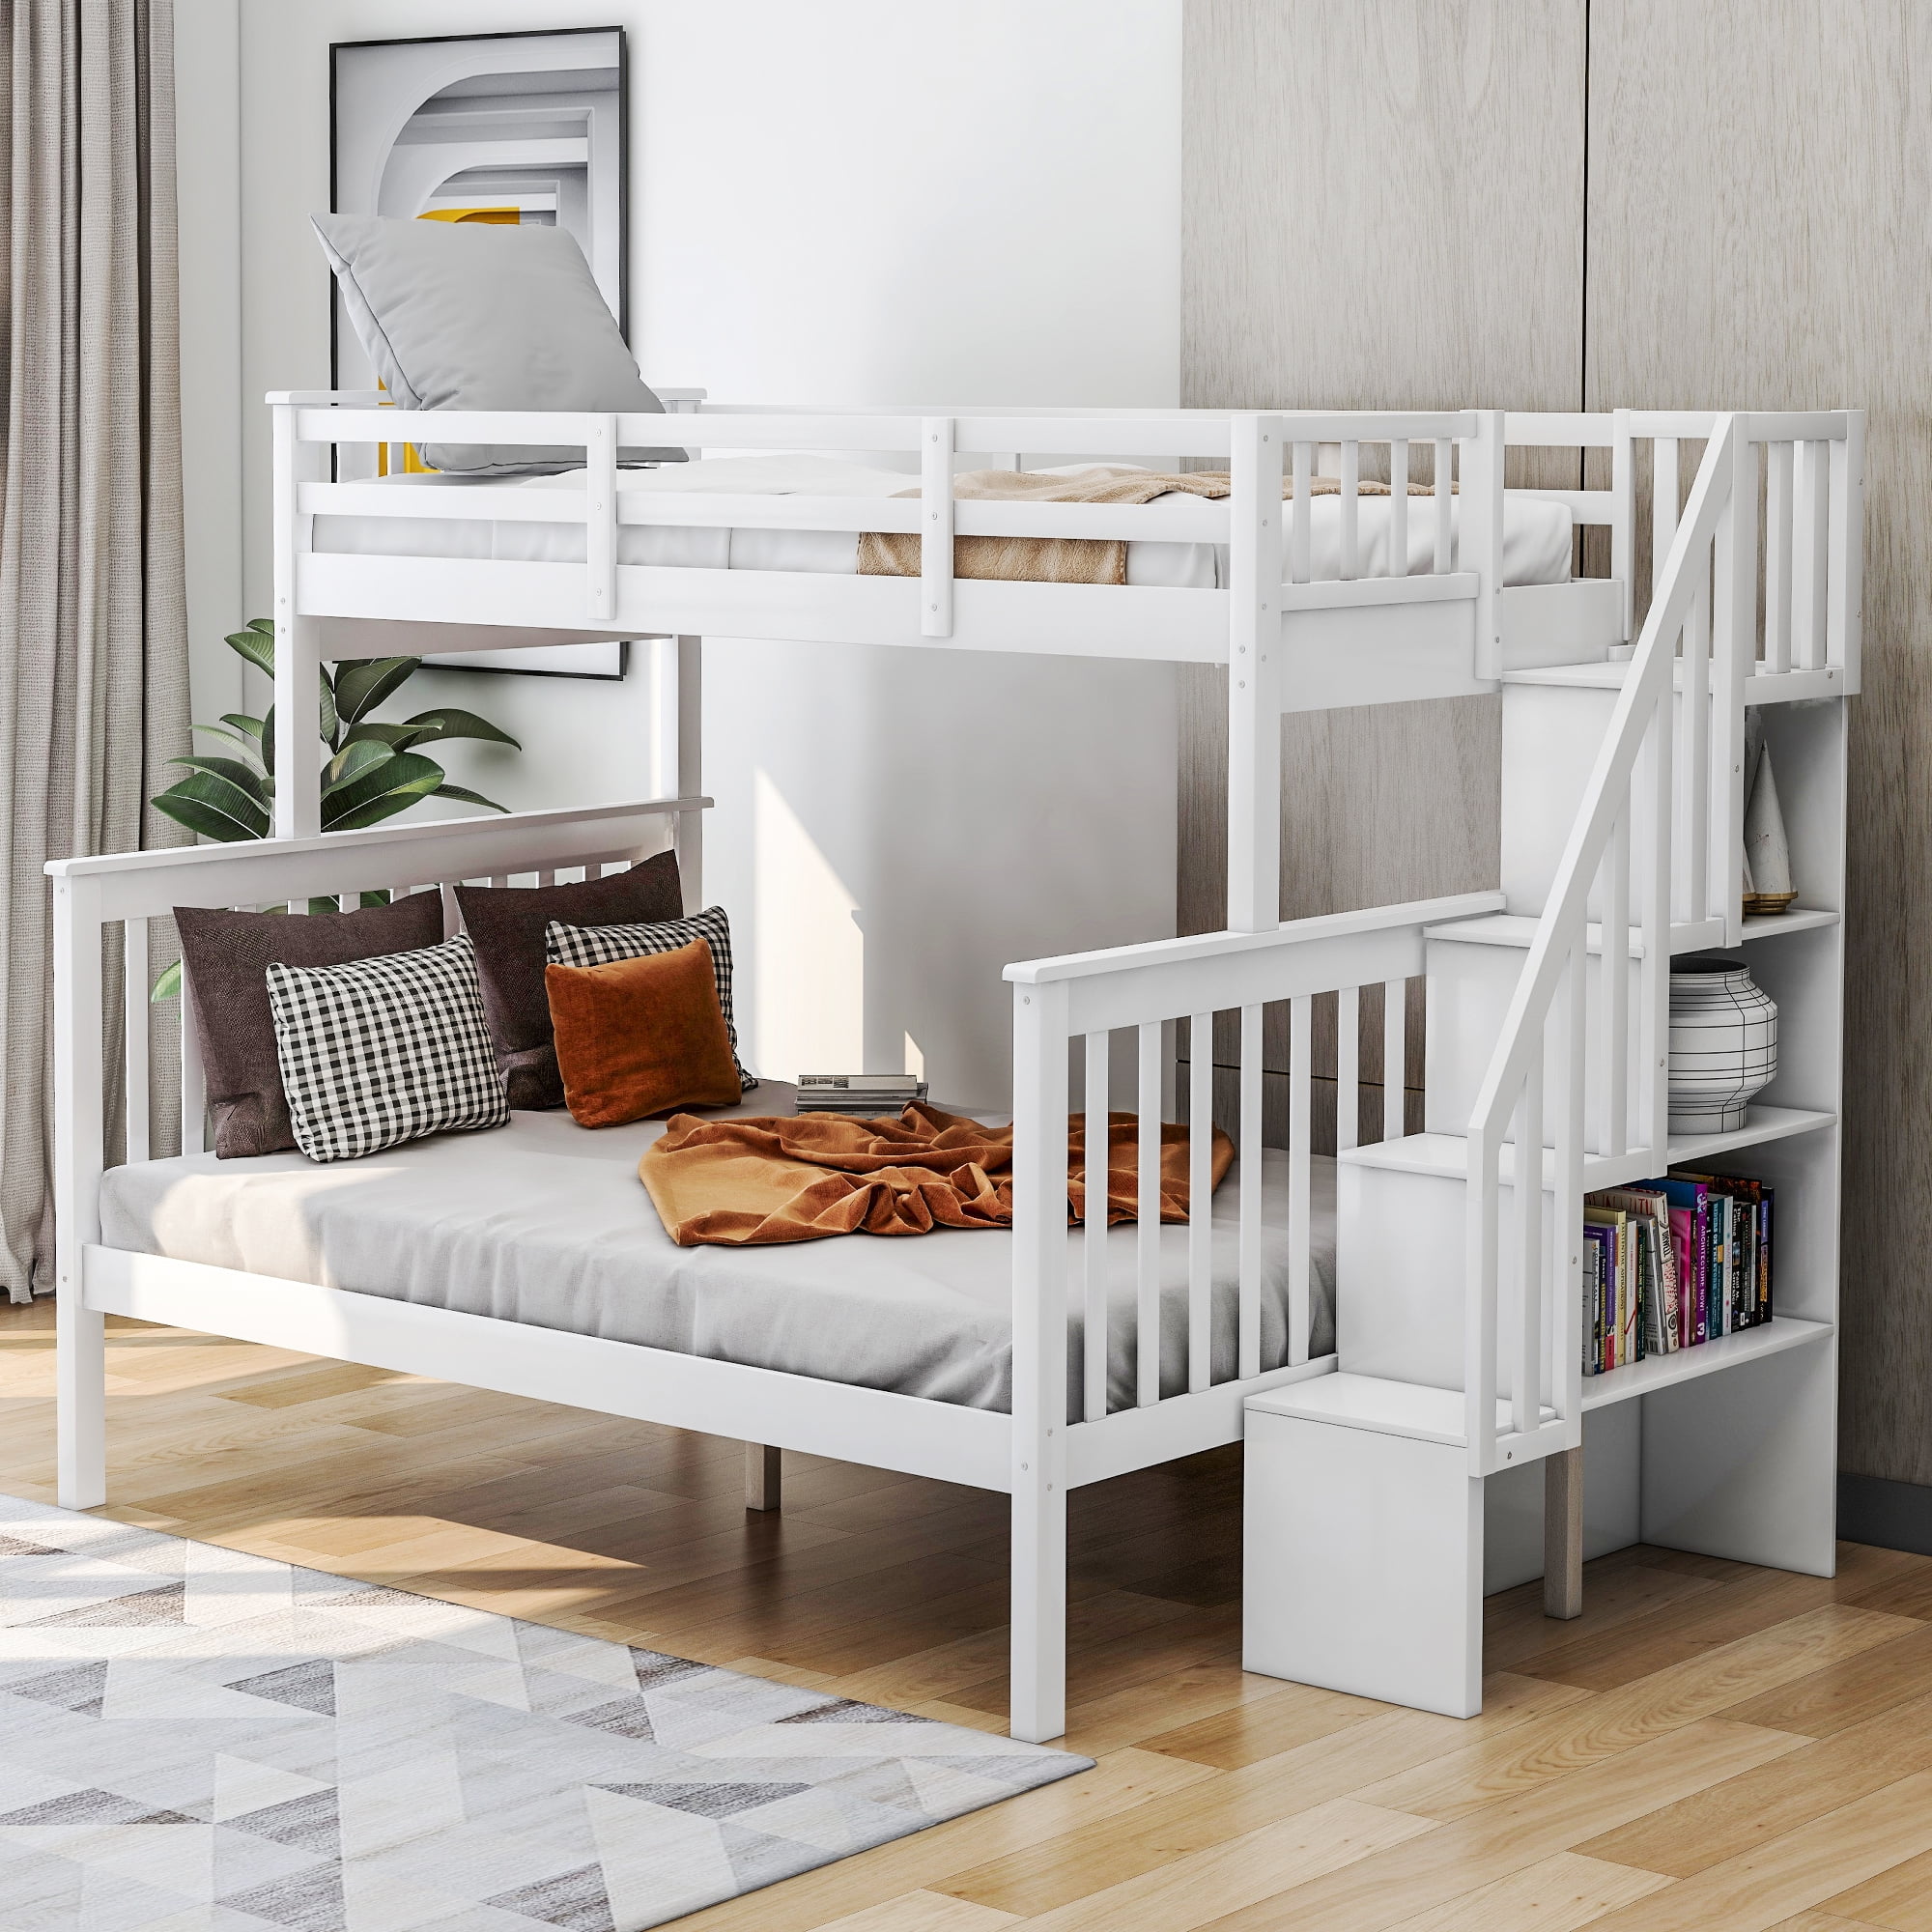 Kids Bunk Beds For Boys Girls Twin, Bed Guard Rail For Bunk Beds